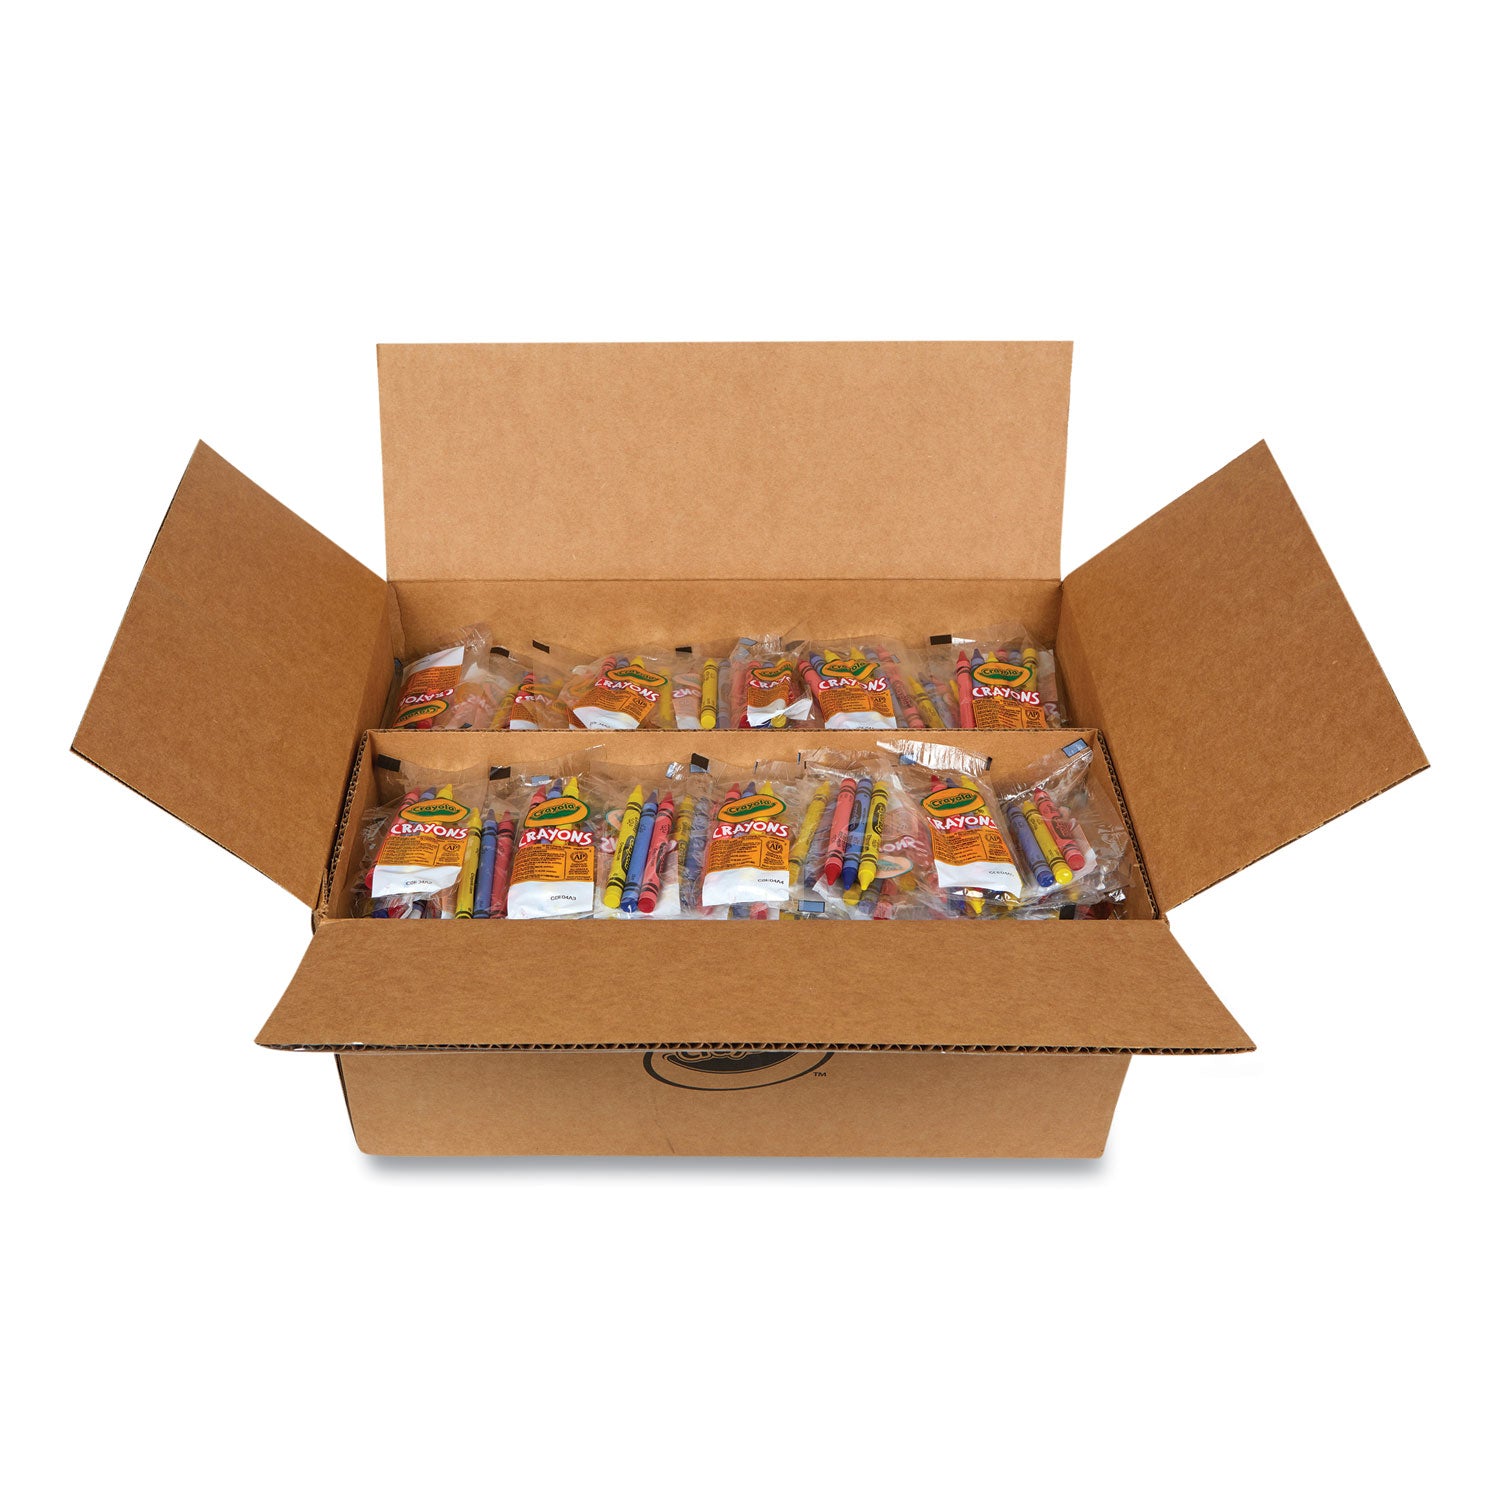 washable-crayons-blue-red-yellow-3-pack-360-packs-carton_cyo520743 - 4